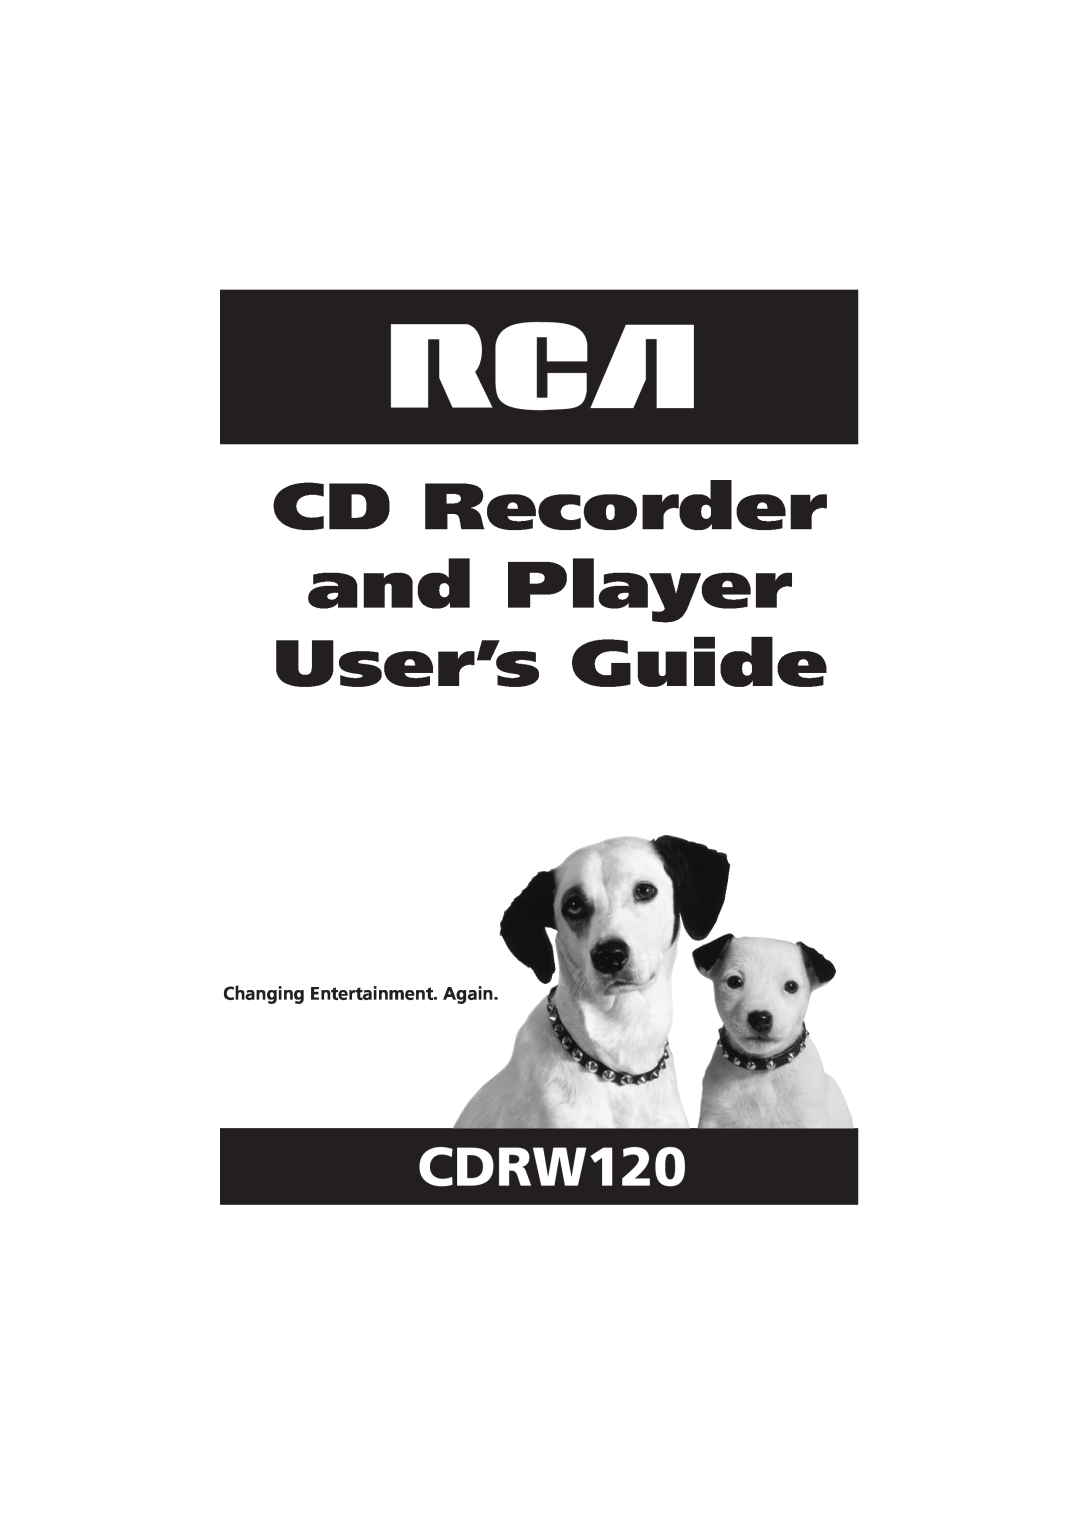 RCA CDRW120 manual CD Recorder and Player User’s Guide, Changing Entertainment. Again 